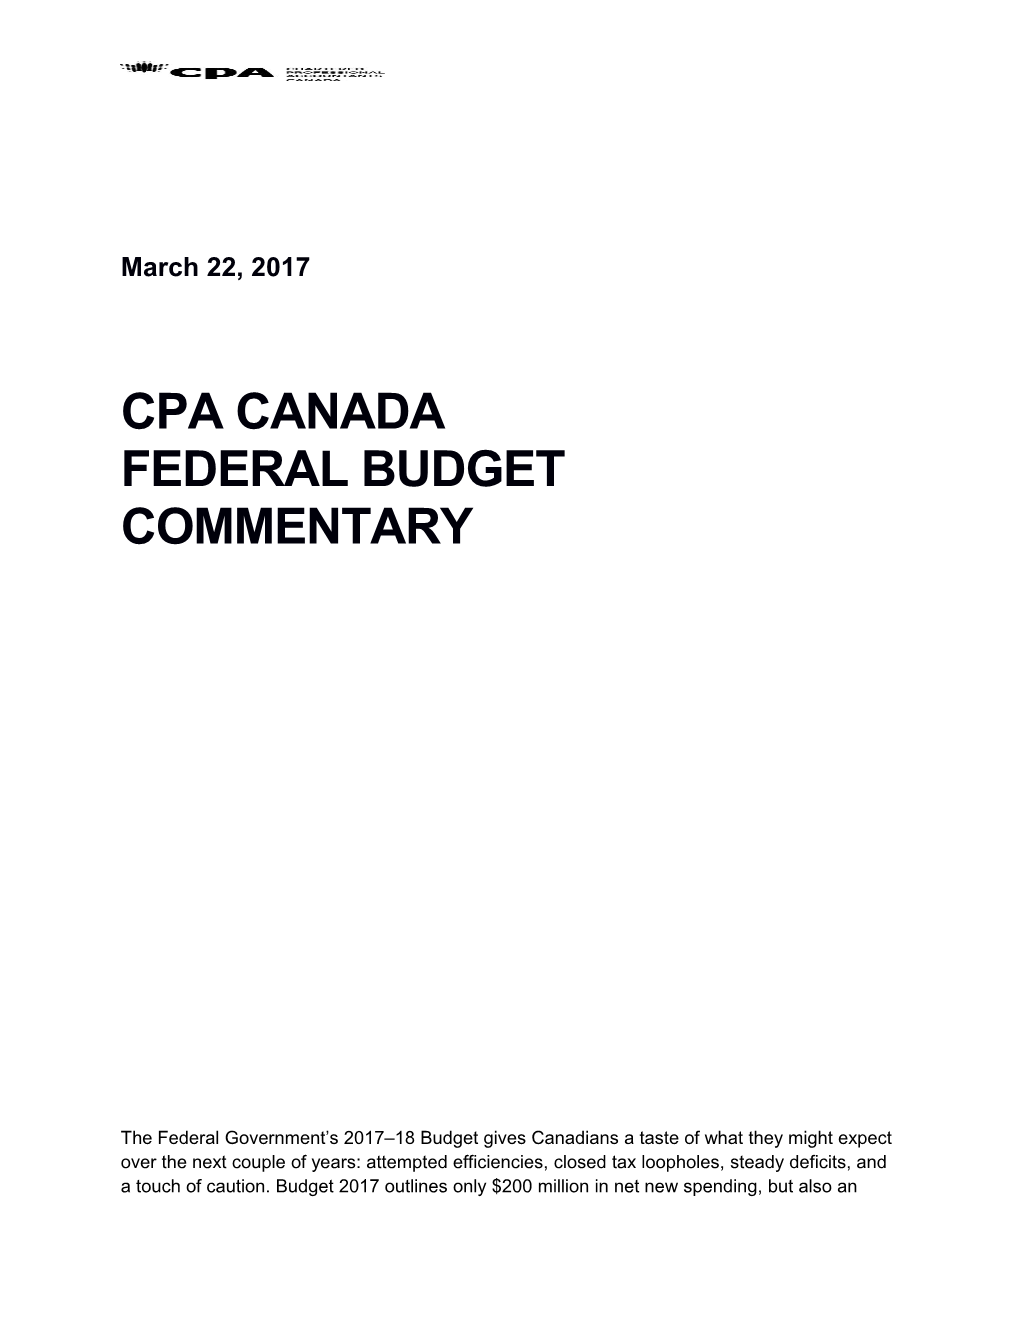 1Federal Budget Commentary 2017